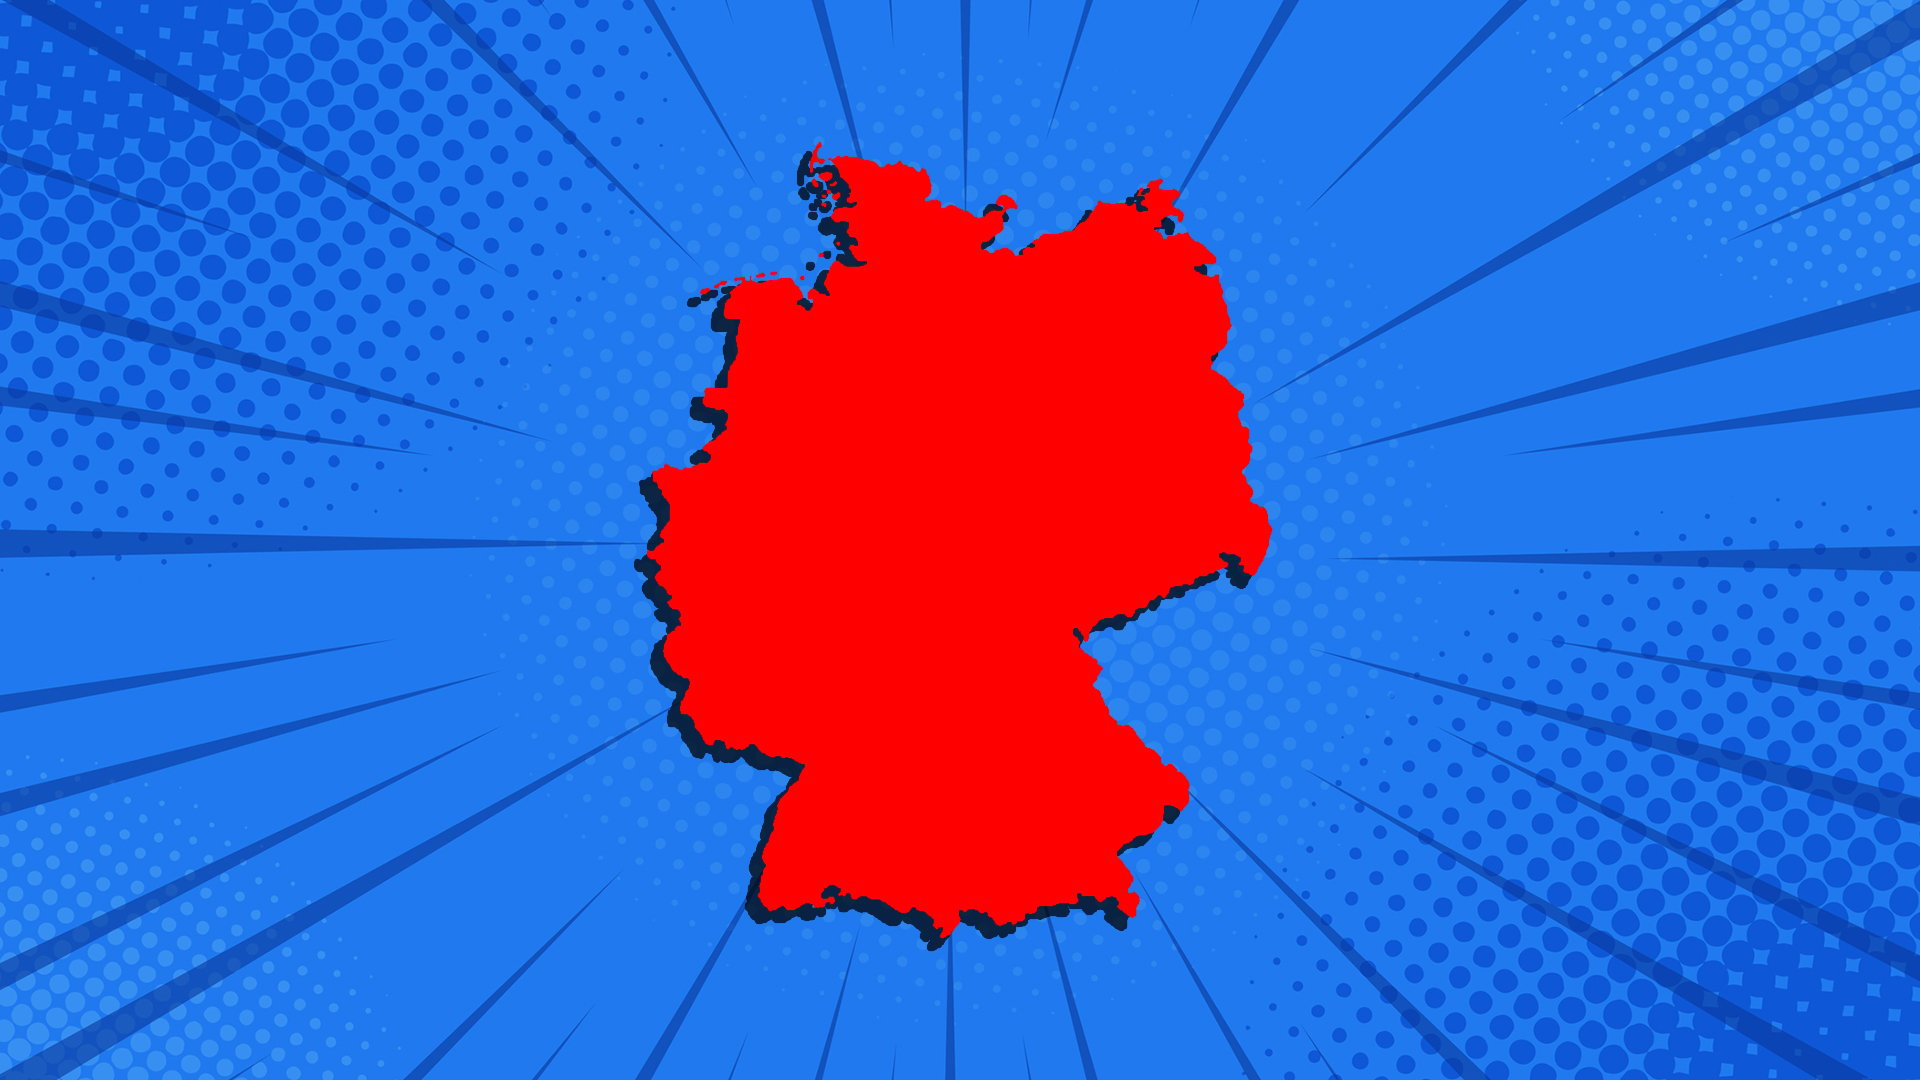 An outline of Germany on a map with a blue comic style background